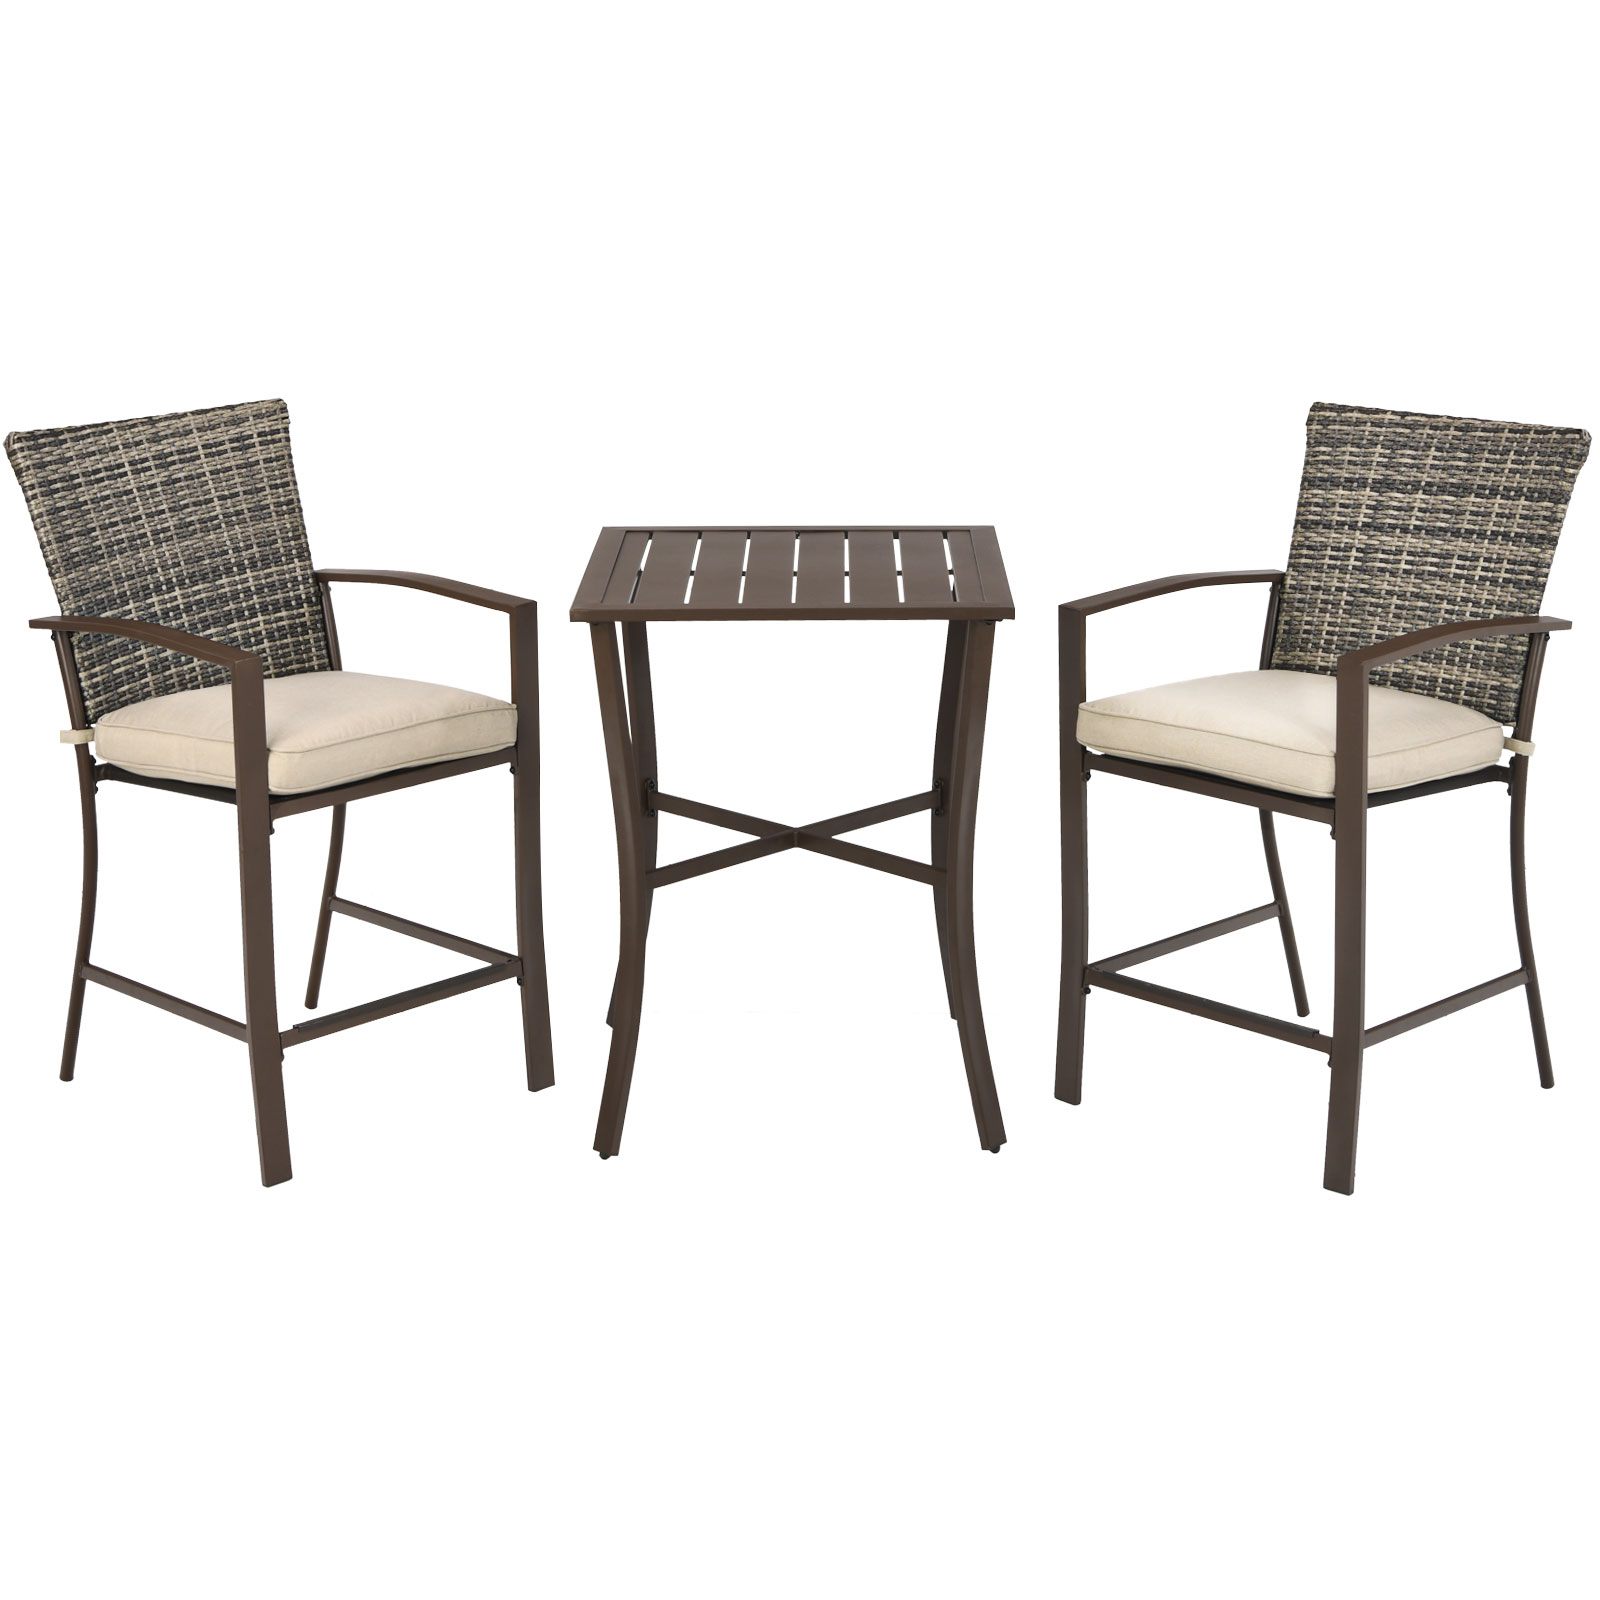 Patiojoy 3-Piece Patio Rattan Furniture Set Outdoor Bistro Set Cushioned Chairs & Table Set Brown - image 1 of 5